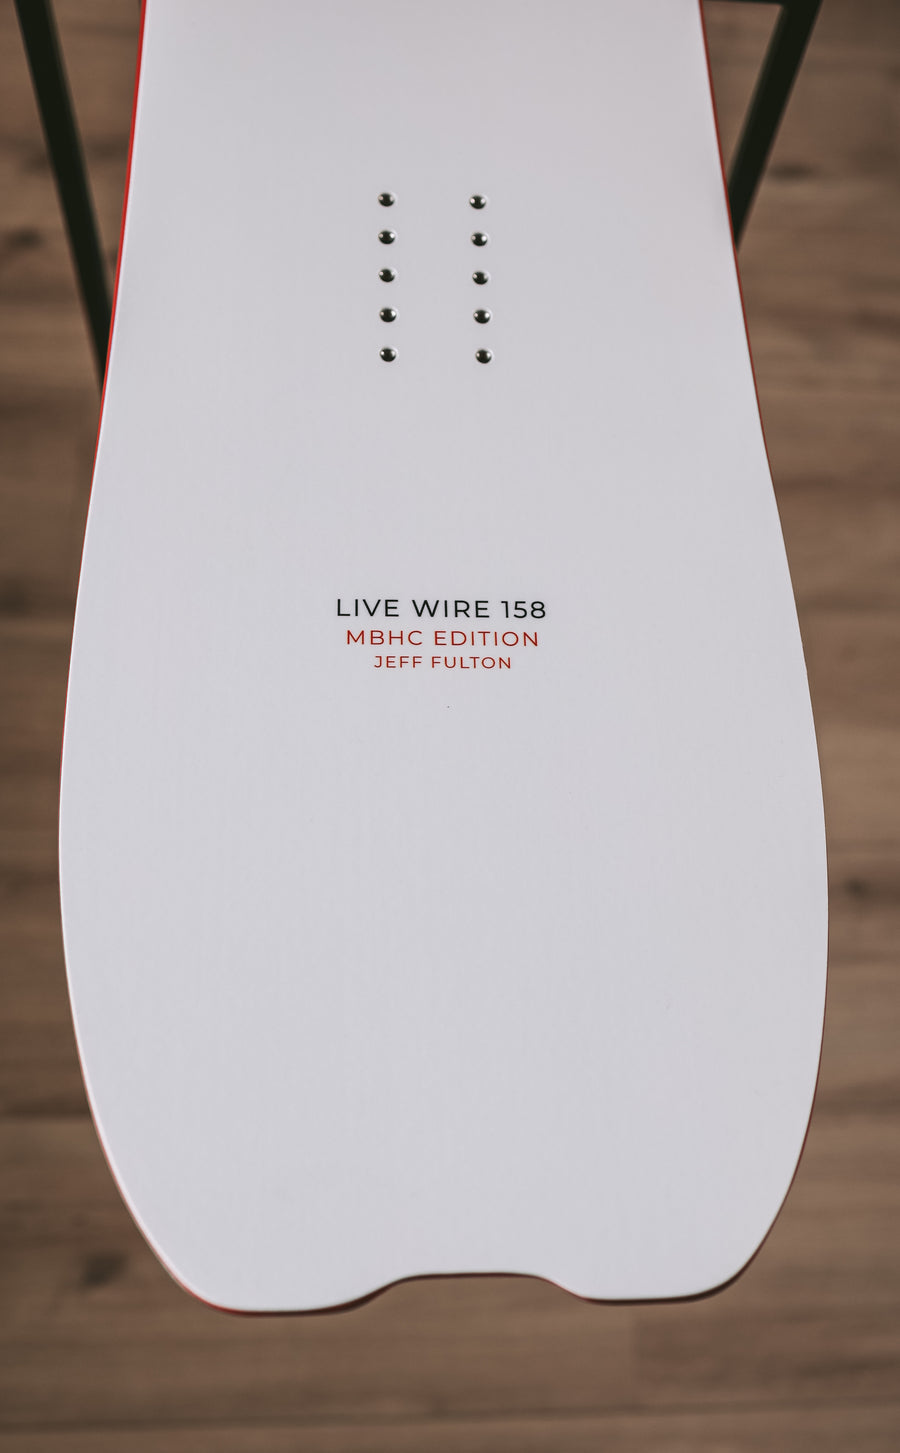 Live Wire 158 / MBHC edition